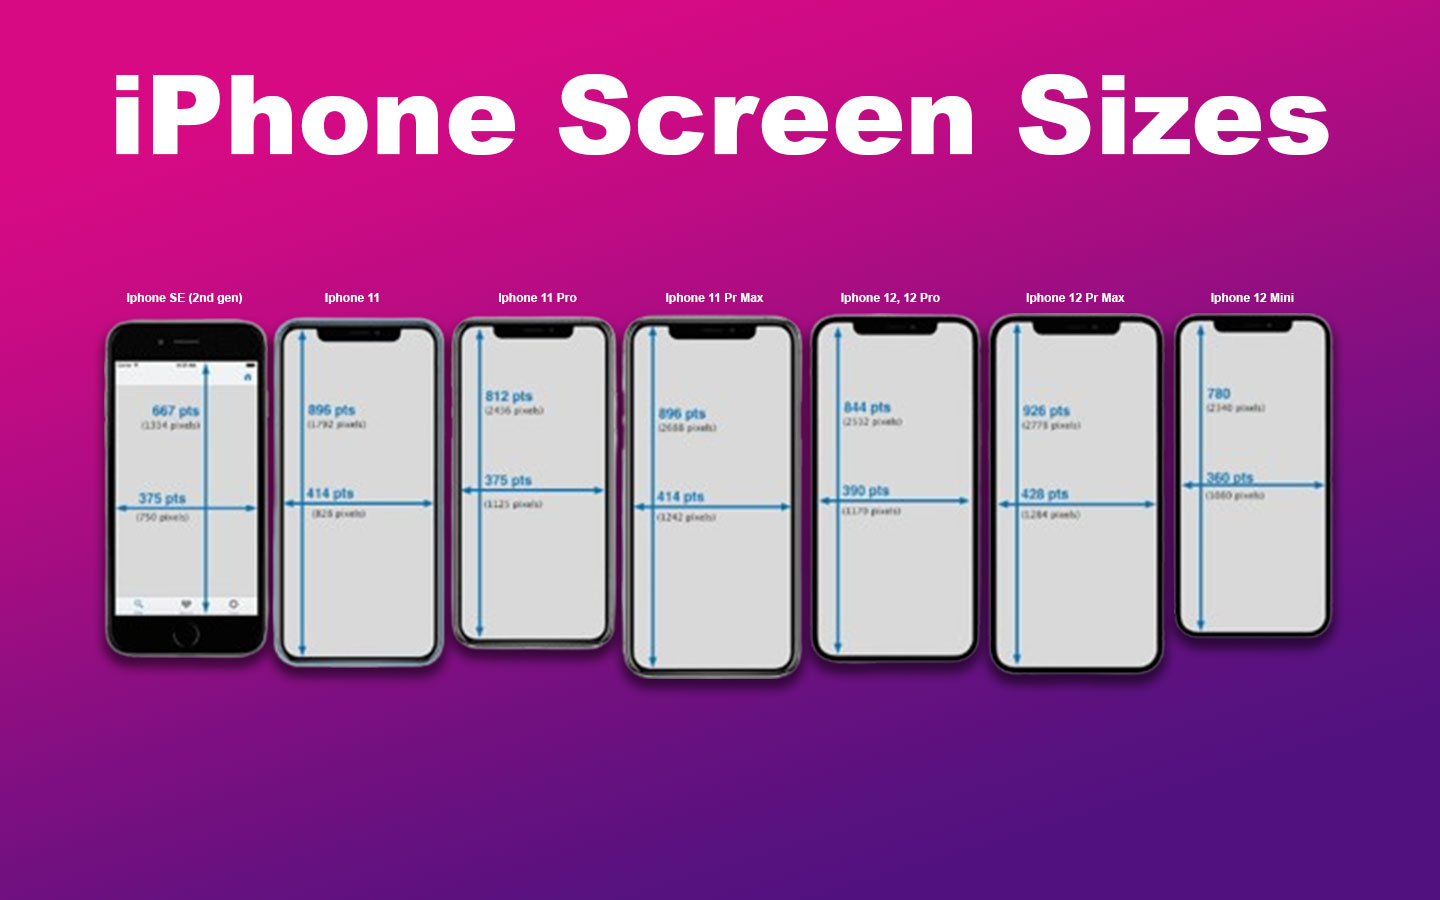 How Many iPhone Screen Sizes Are There